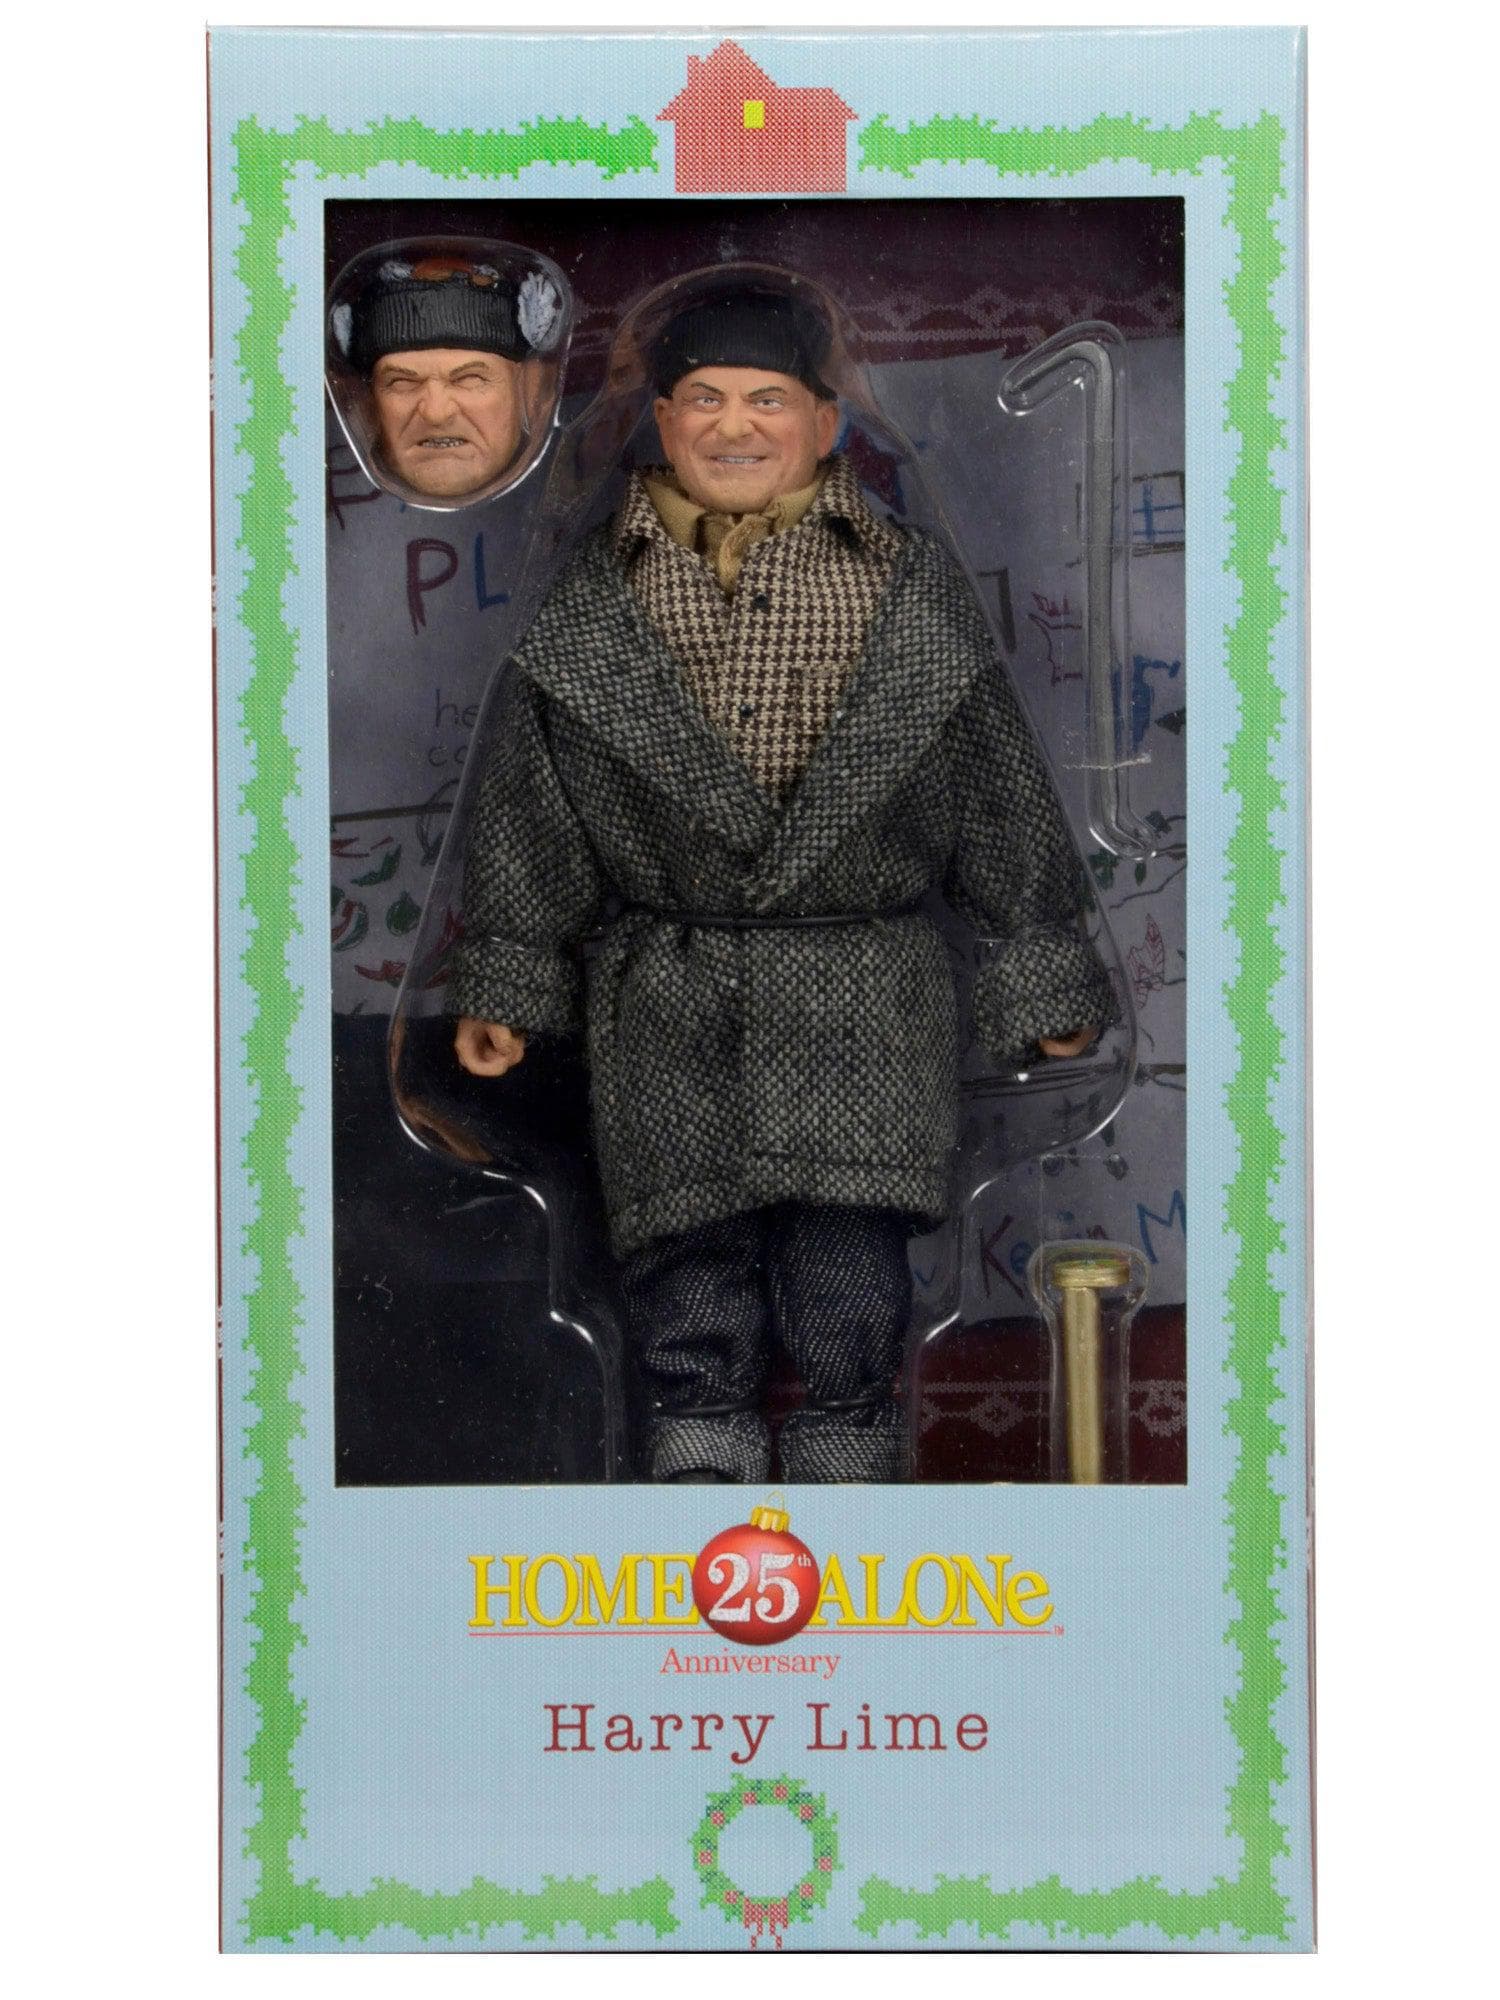 NECA - Home Alone - 8" Scale Clothed Action Figure - Harry - costumes.com